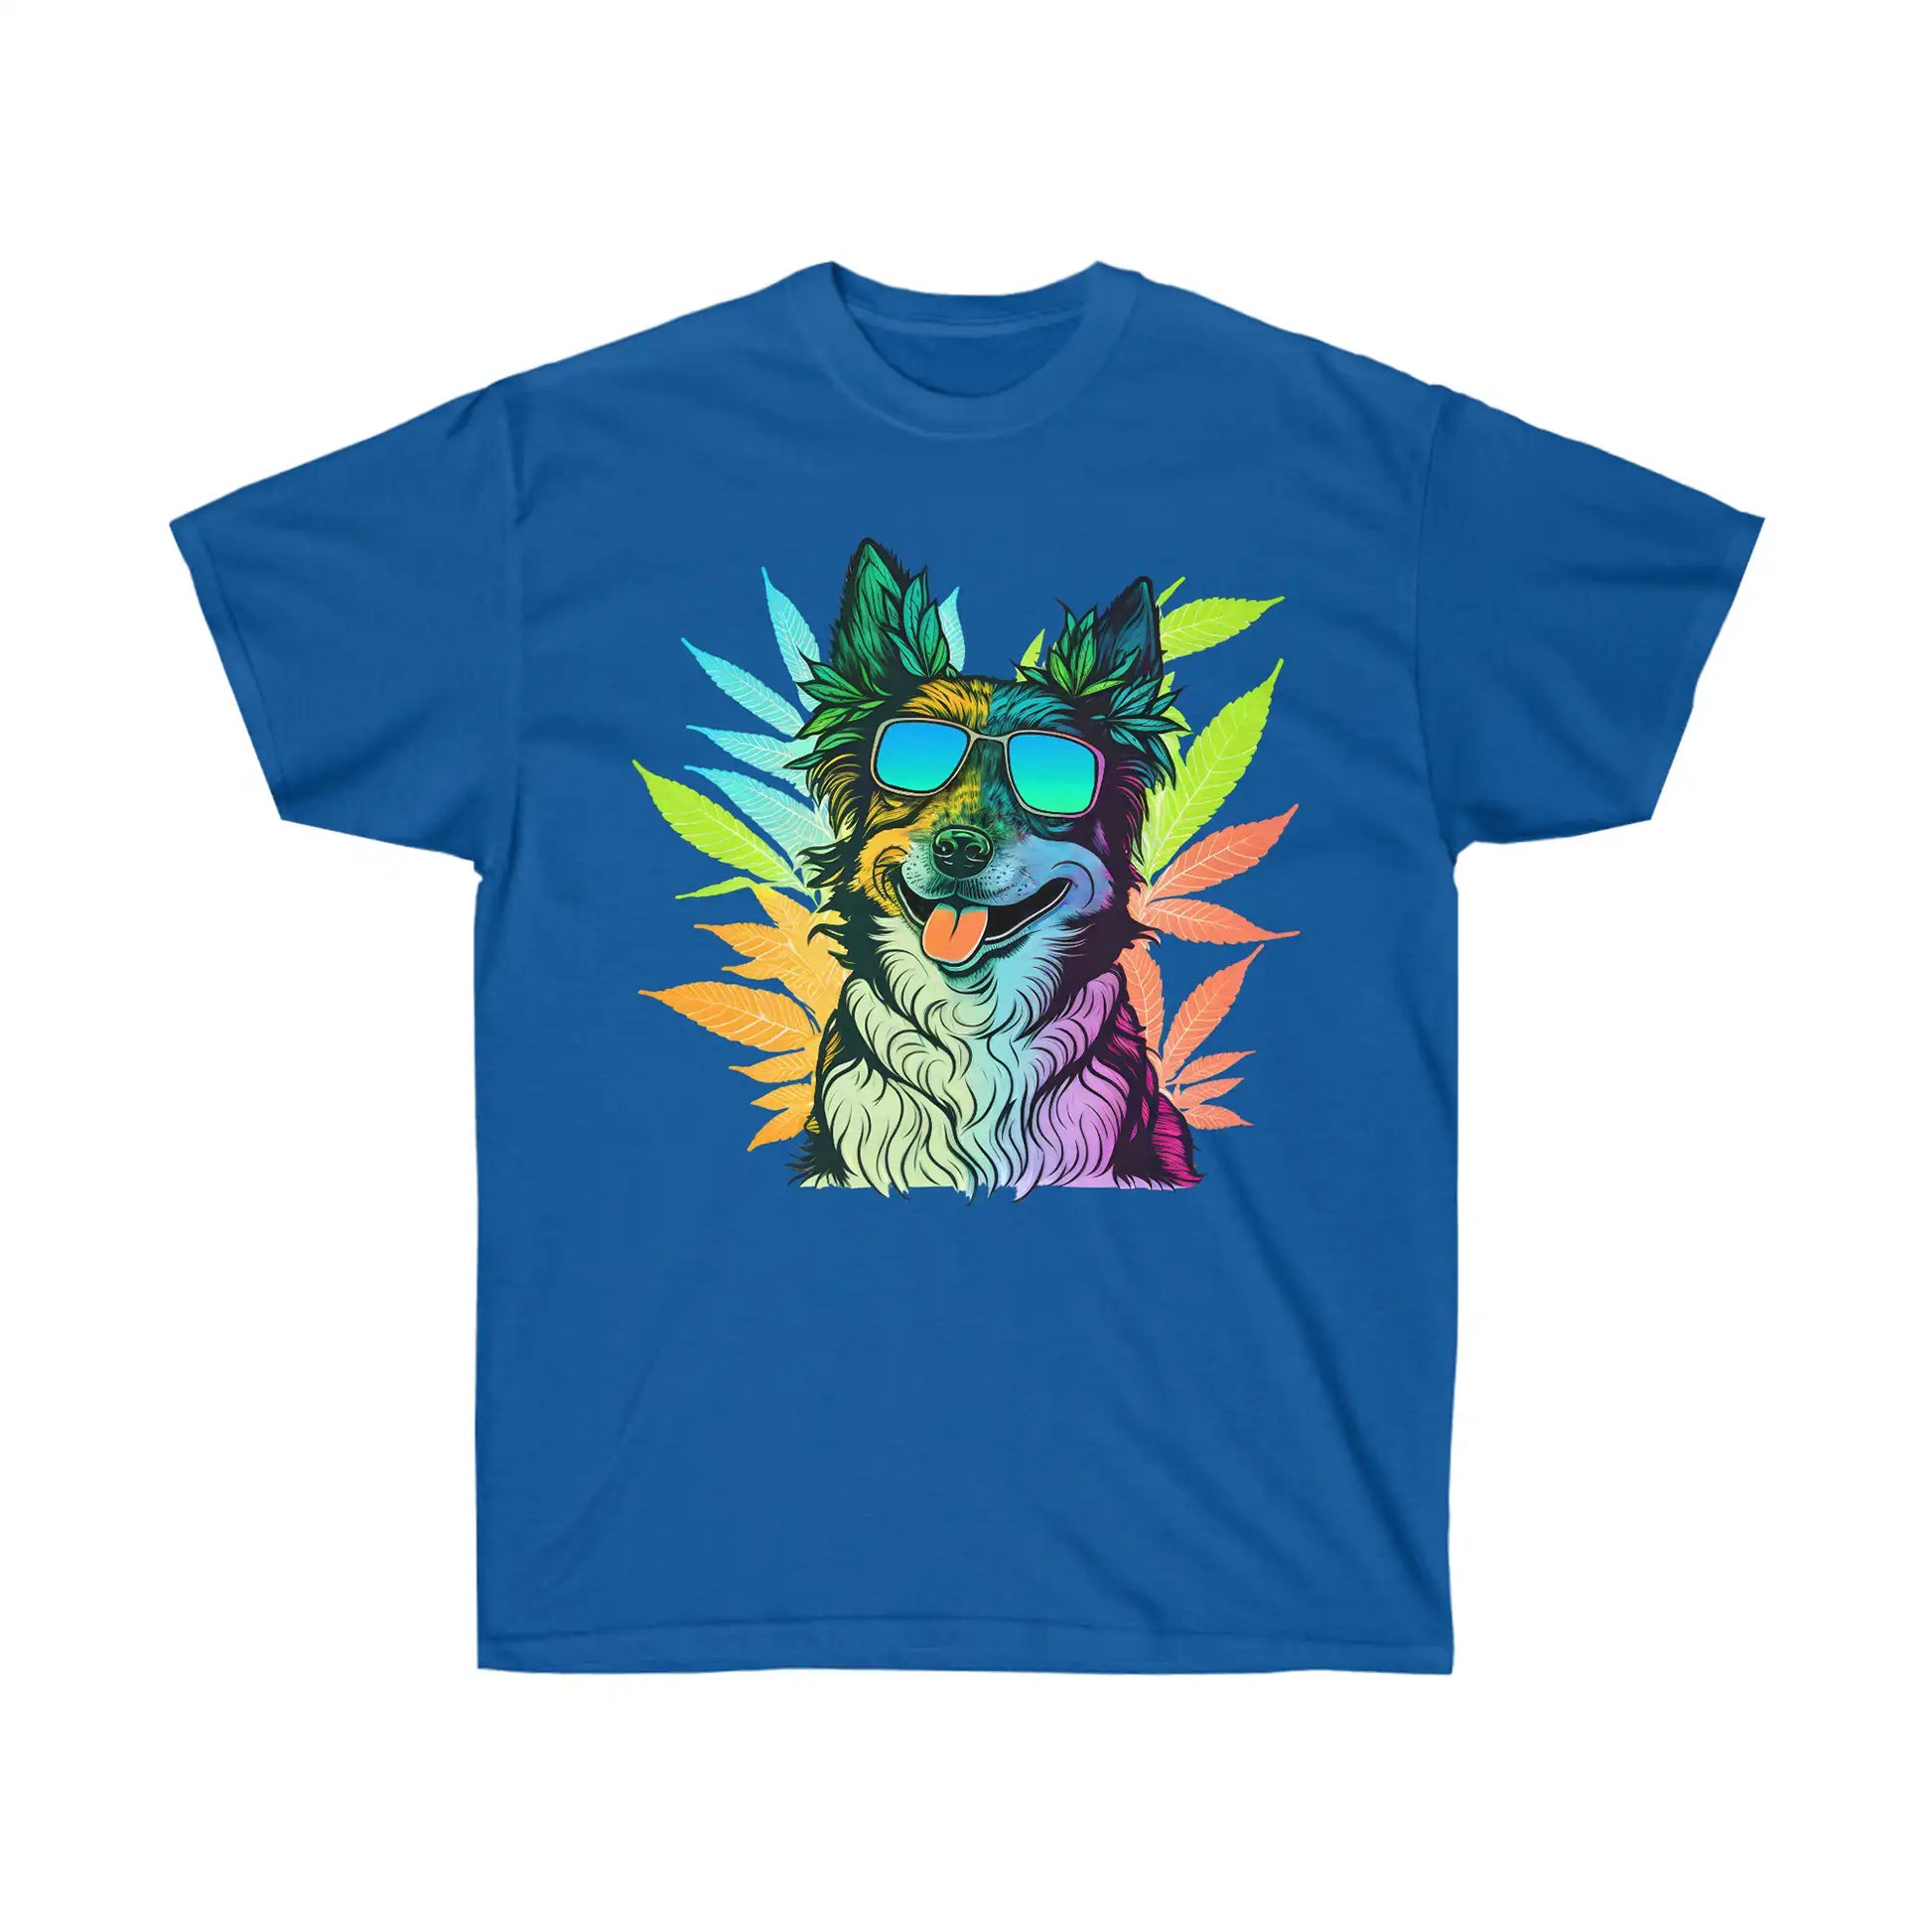 Cool Border Collie with shades surrounded by cannabis on a blue weed t shirt